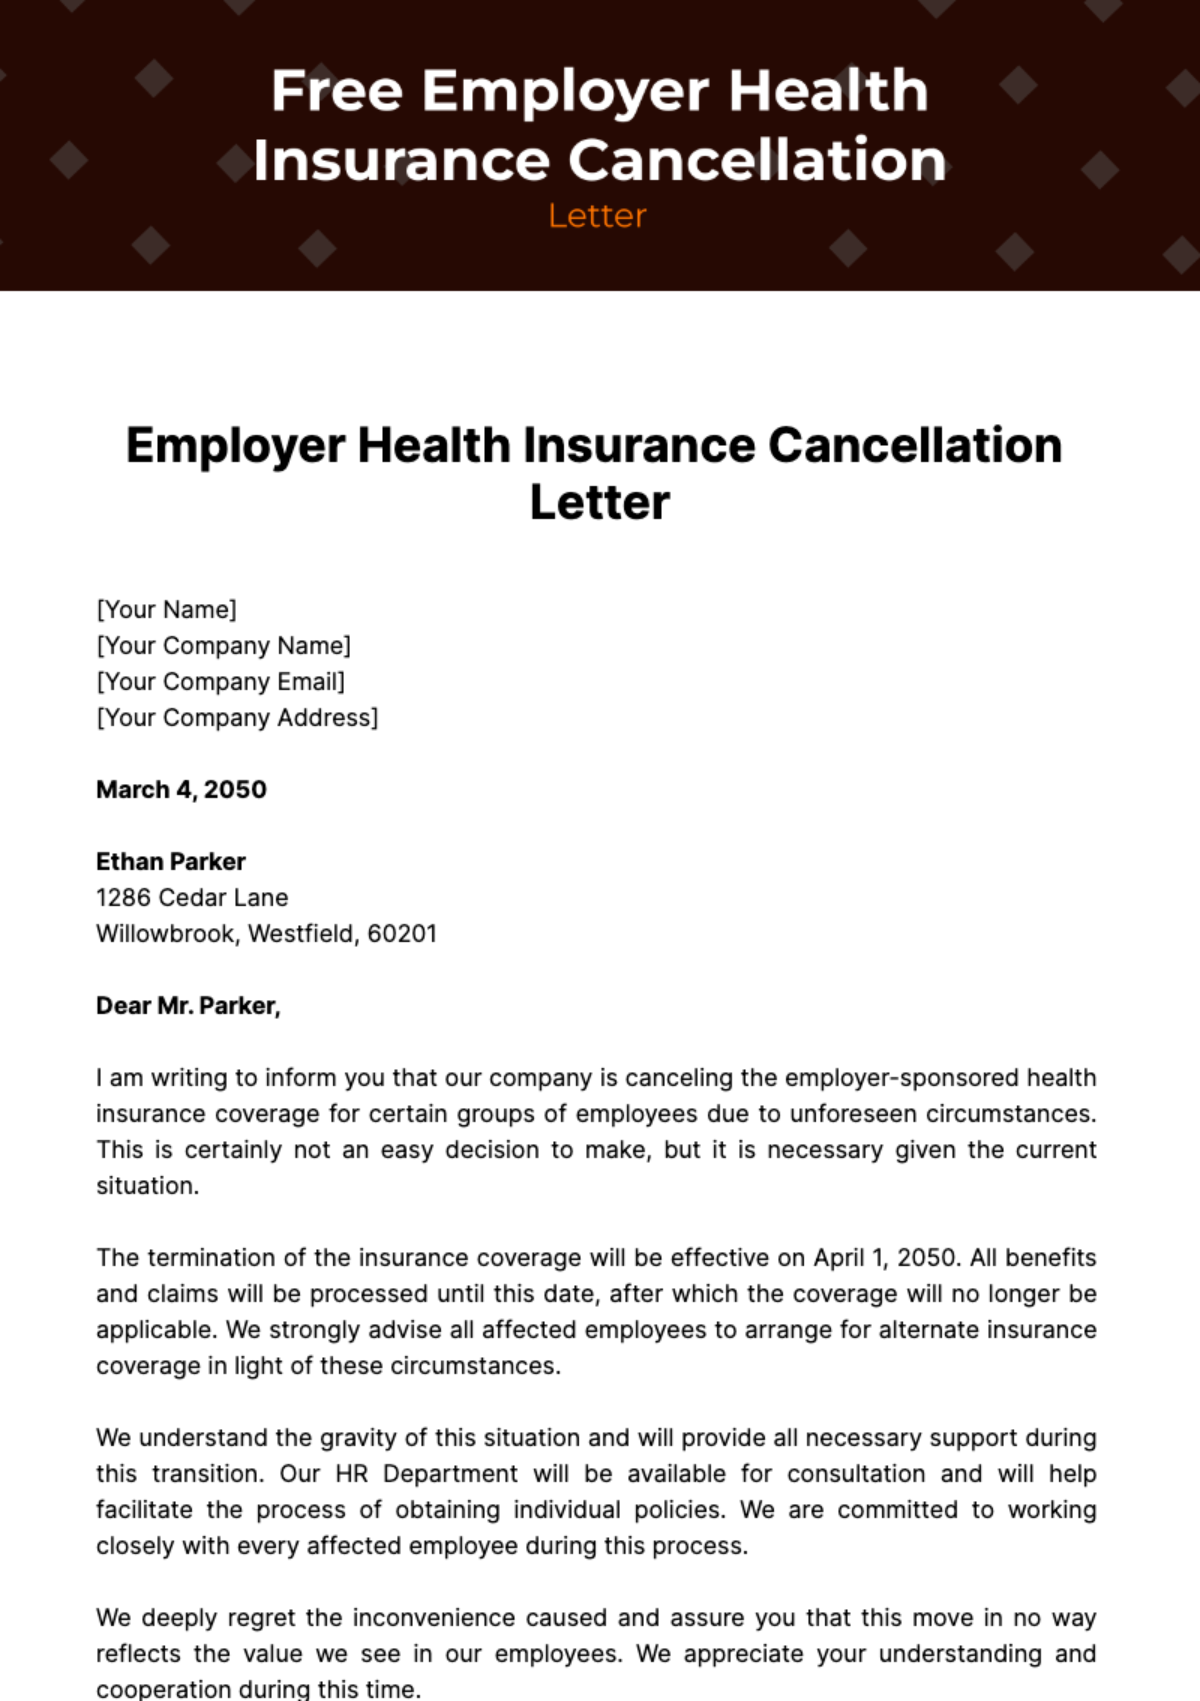 Free Employer Health Insurance Cancellation Letter Template